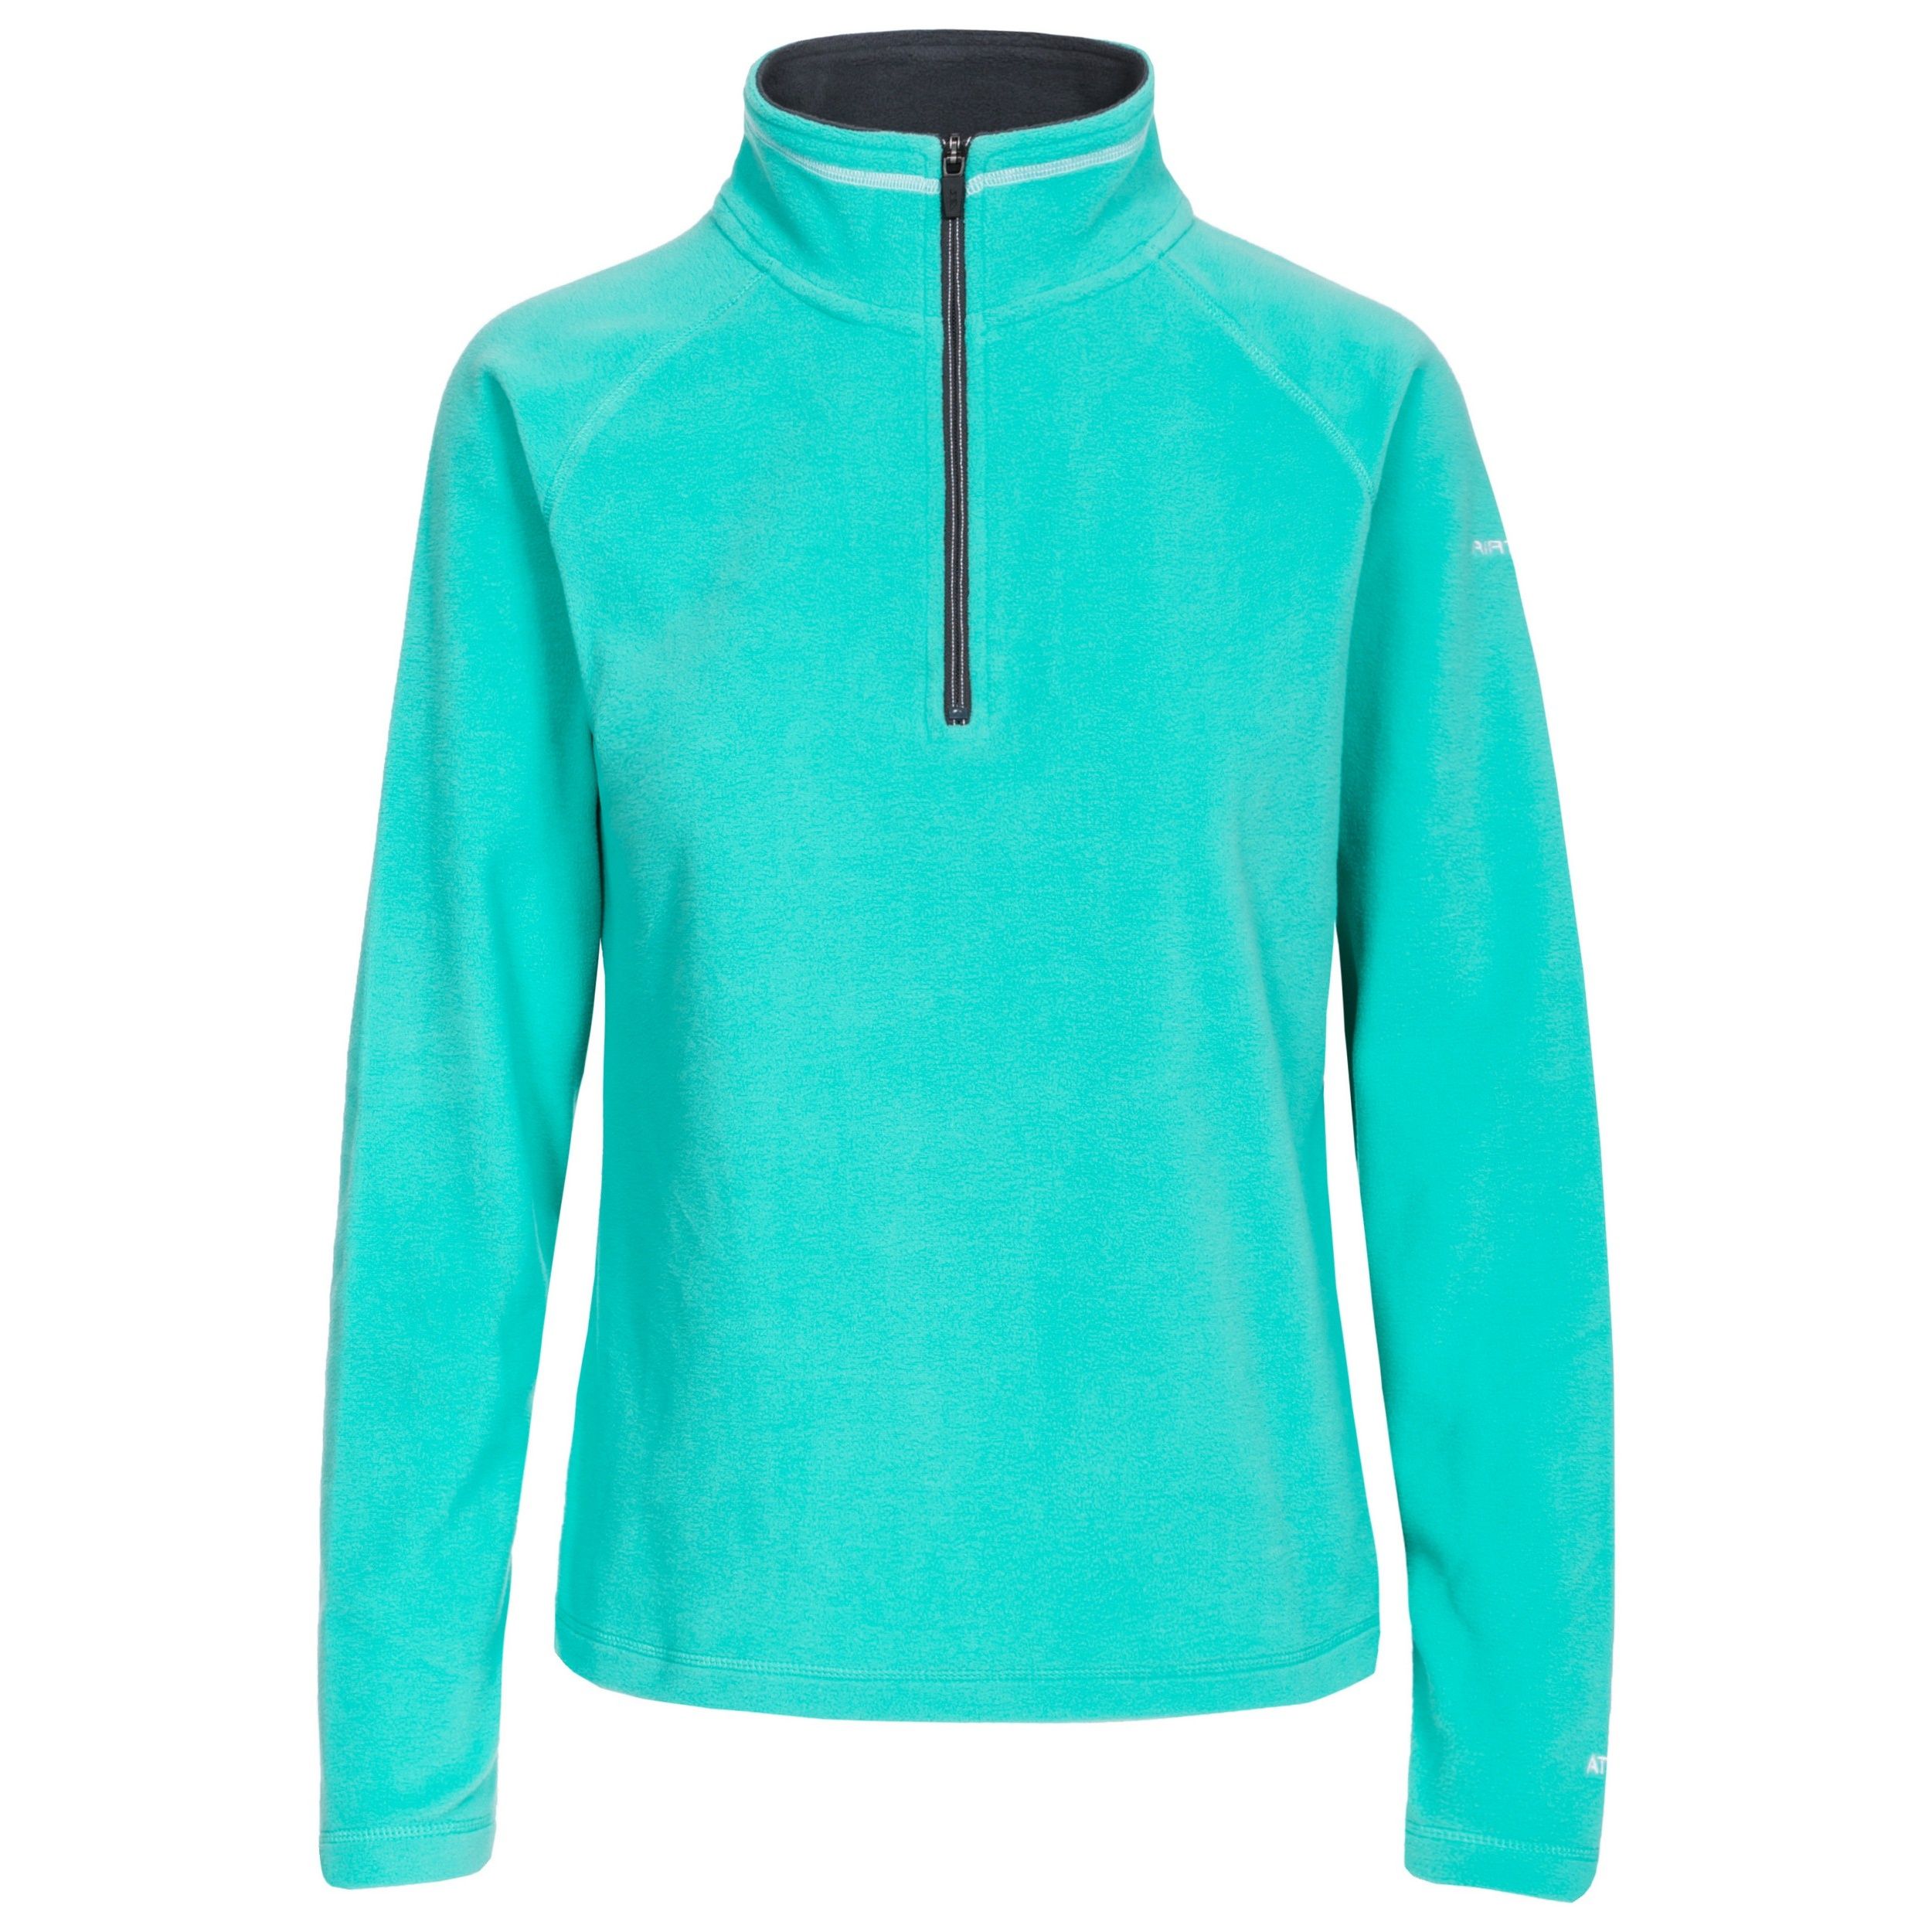 Microfleece top with anti pilling. 1/2 zip neck. Contrast inner collar and neck tape. Airtrap. 100% polyester. Trespass Womens Chest Sizing (approx): XS/8 - 32in/81cm, S/10 - 34in/86cm, M/12 - 36in/91.4cm, L/14 - 38in/96.5cm, XL/16 - 40in/101.5cm, XXL/18 - 42in/106.5cm.